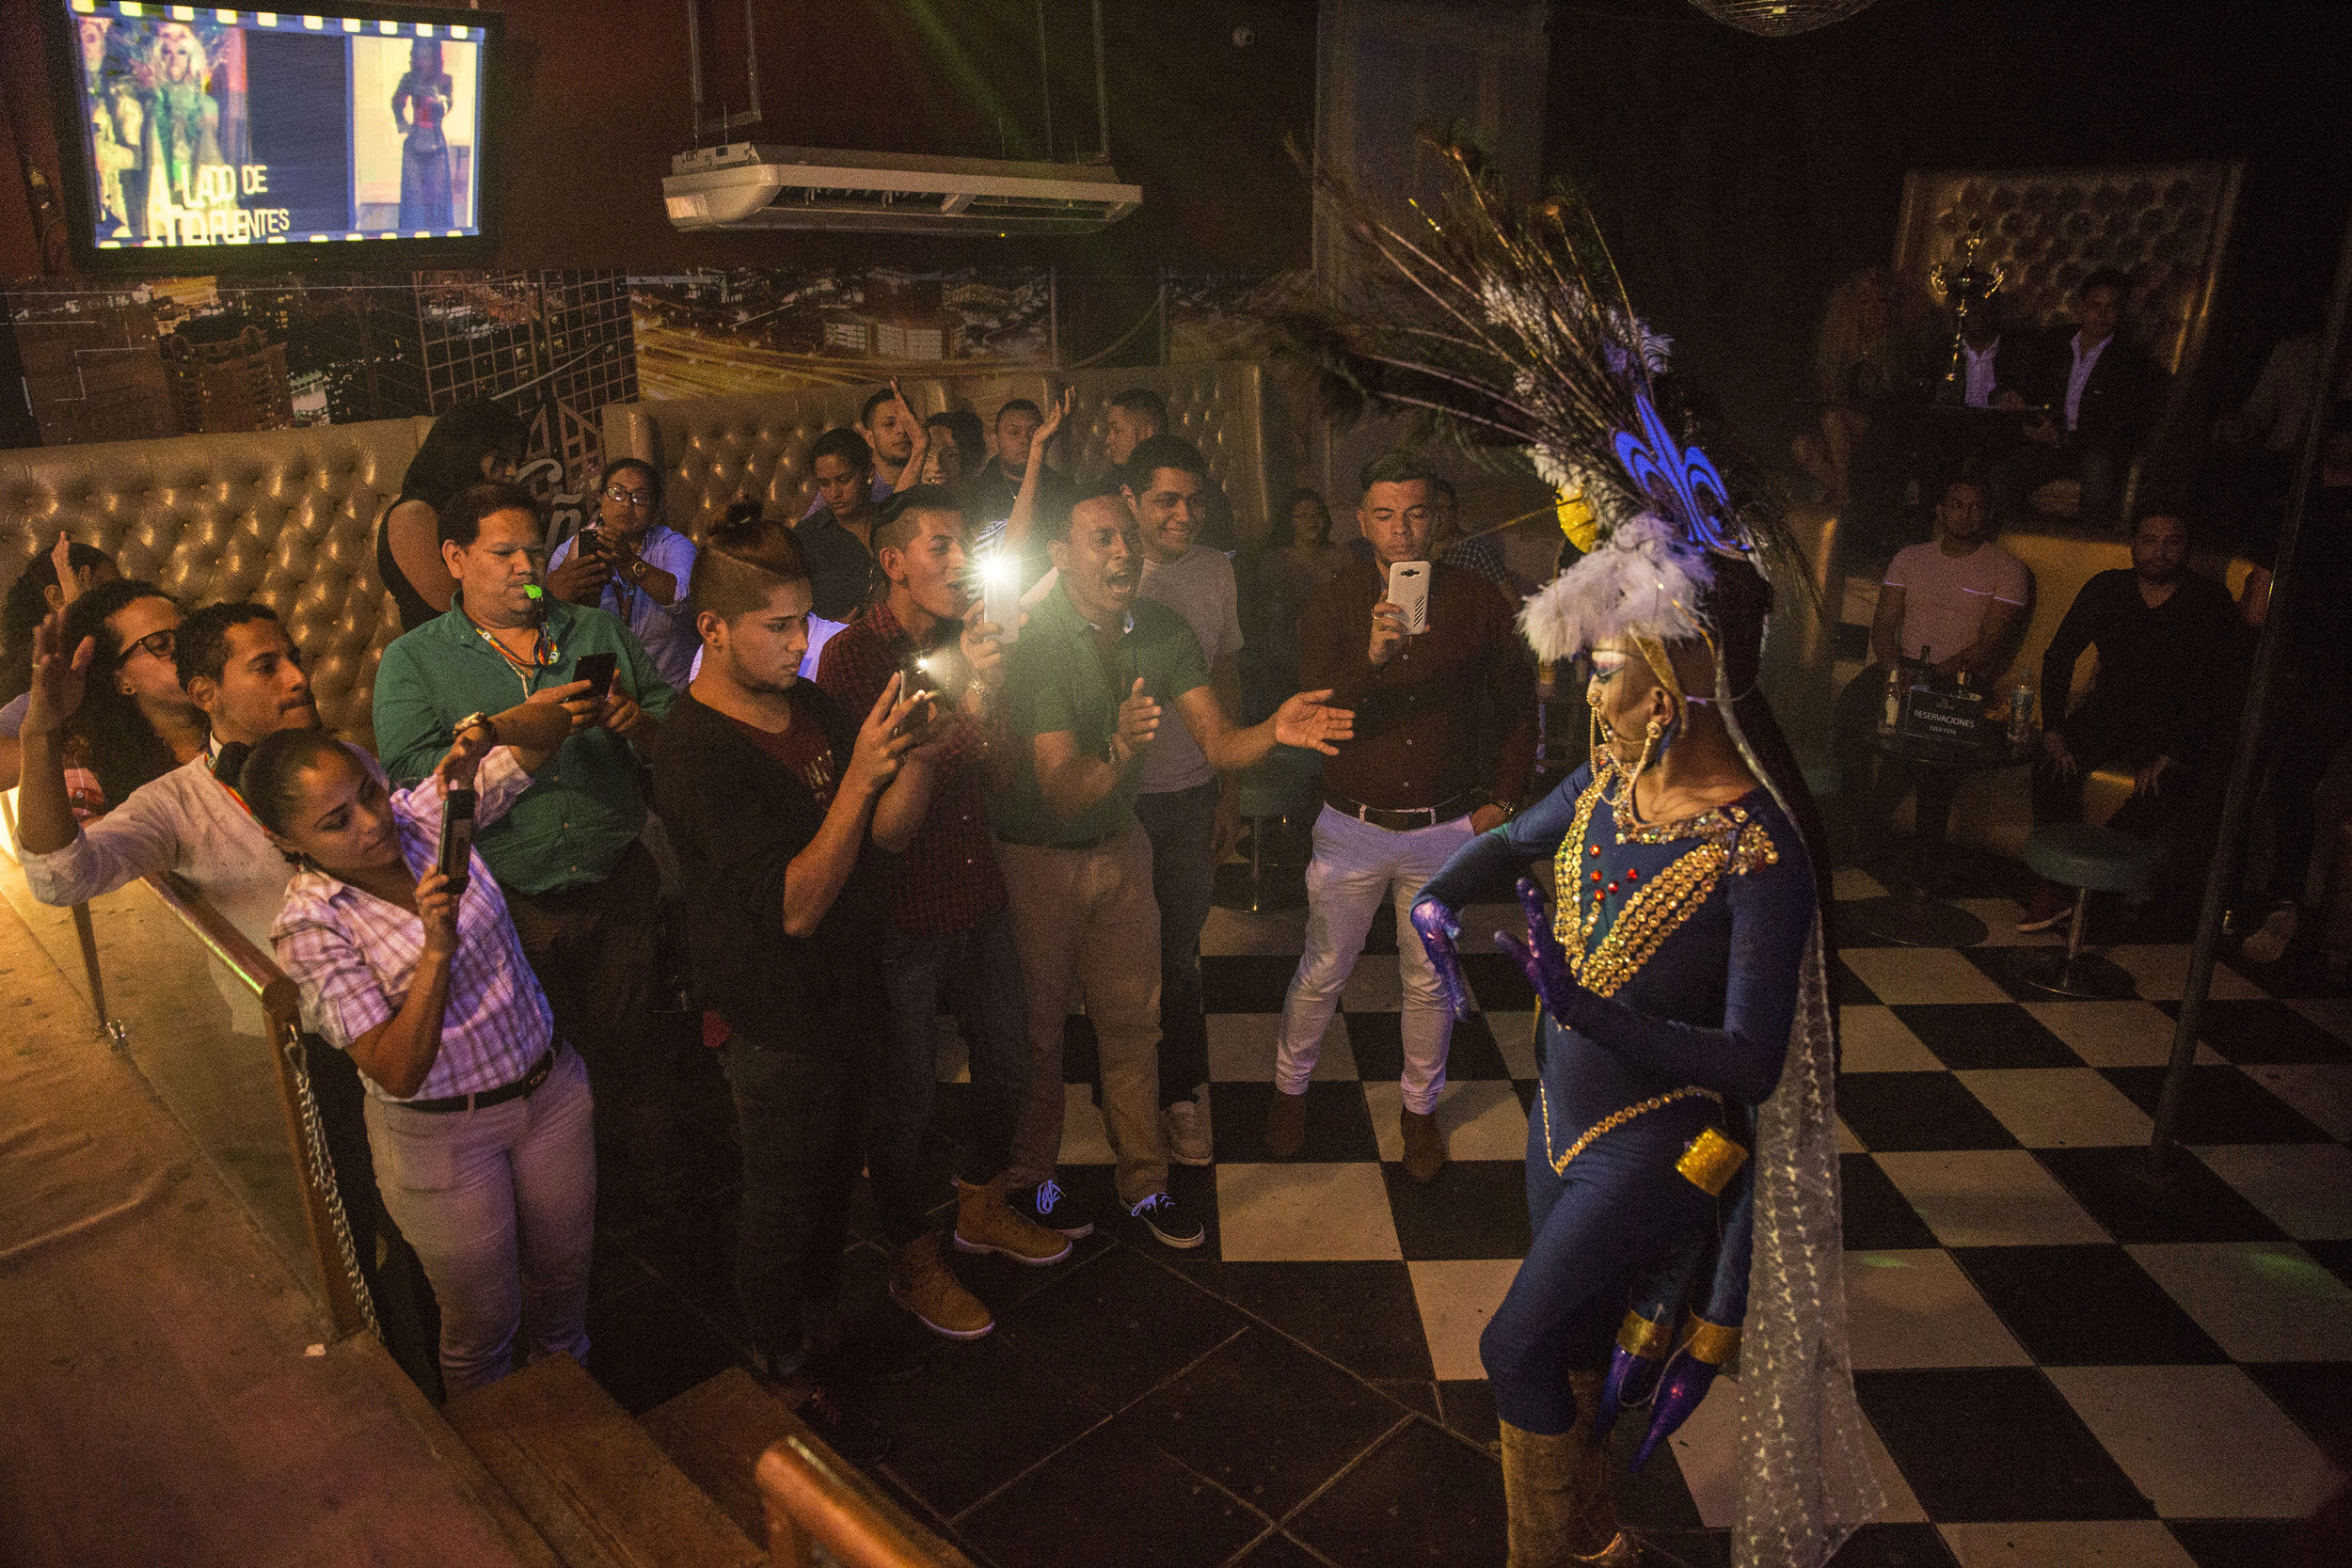  People show their support to their companion Diva Zuraika, during a beauty contest in gay club in Tegucigalpa, capital of Honduras. 